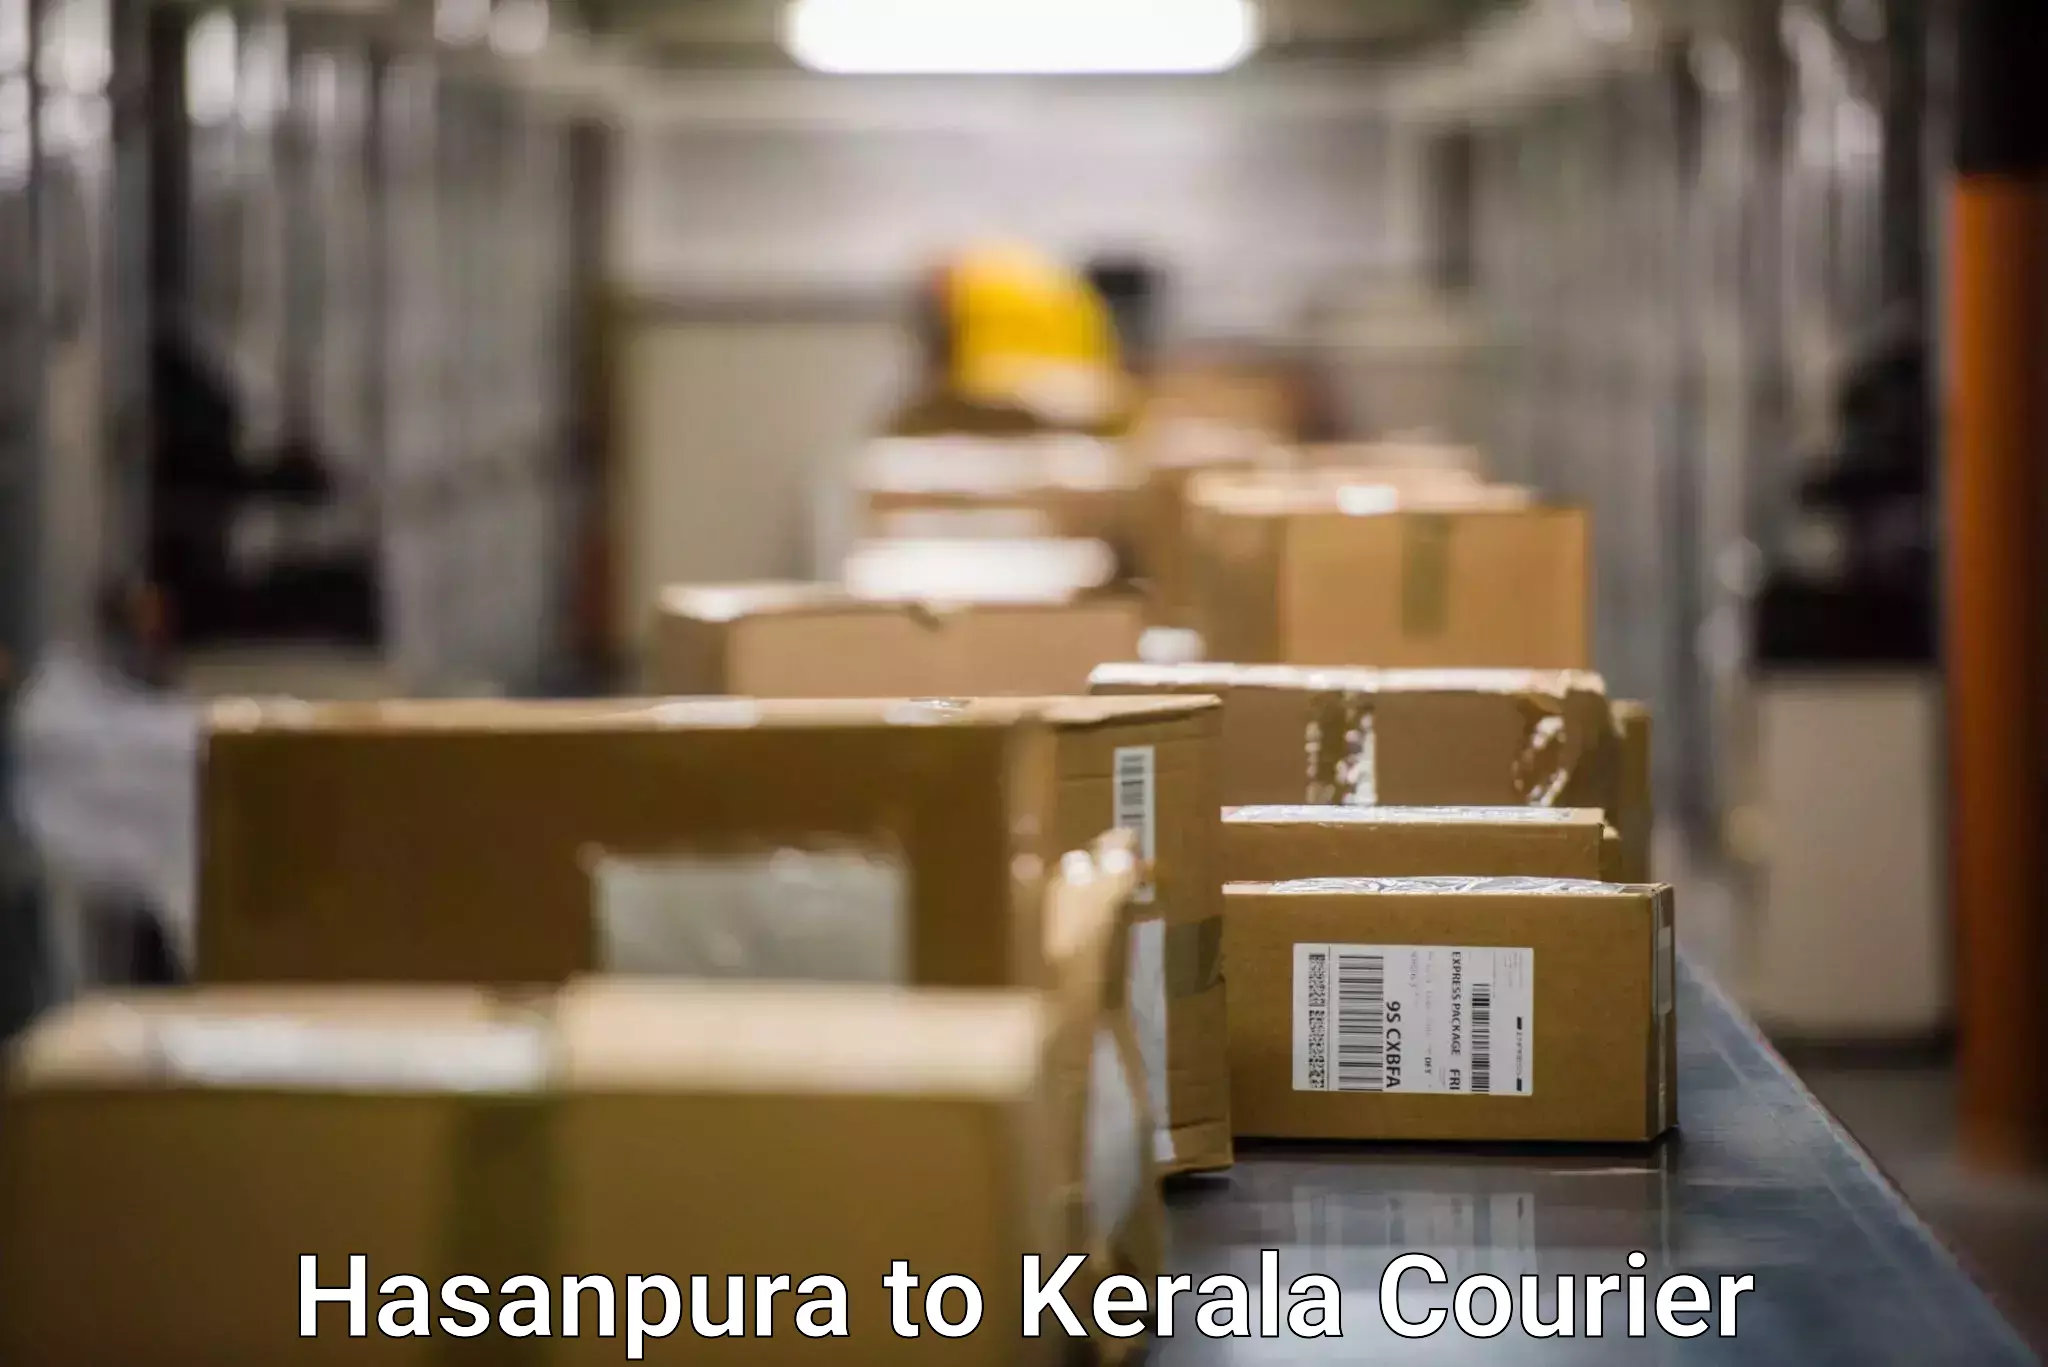 Express delivery network Hasanpura to Chungatra